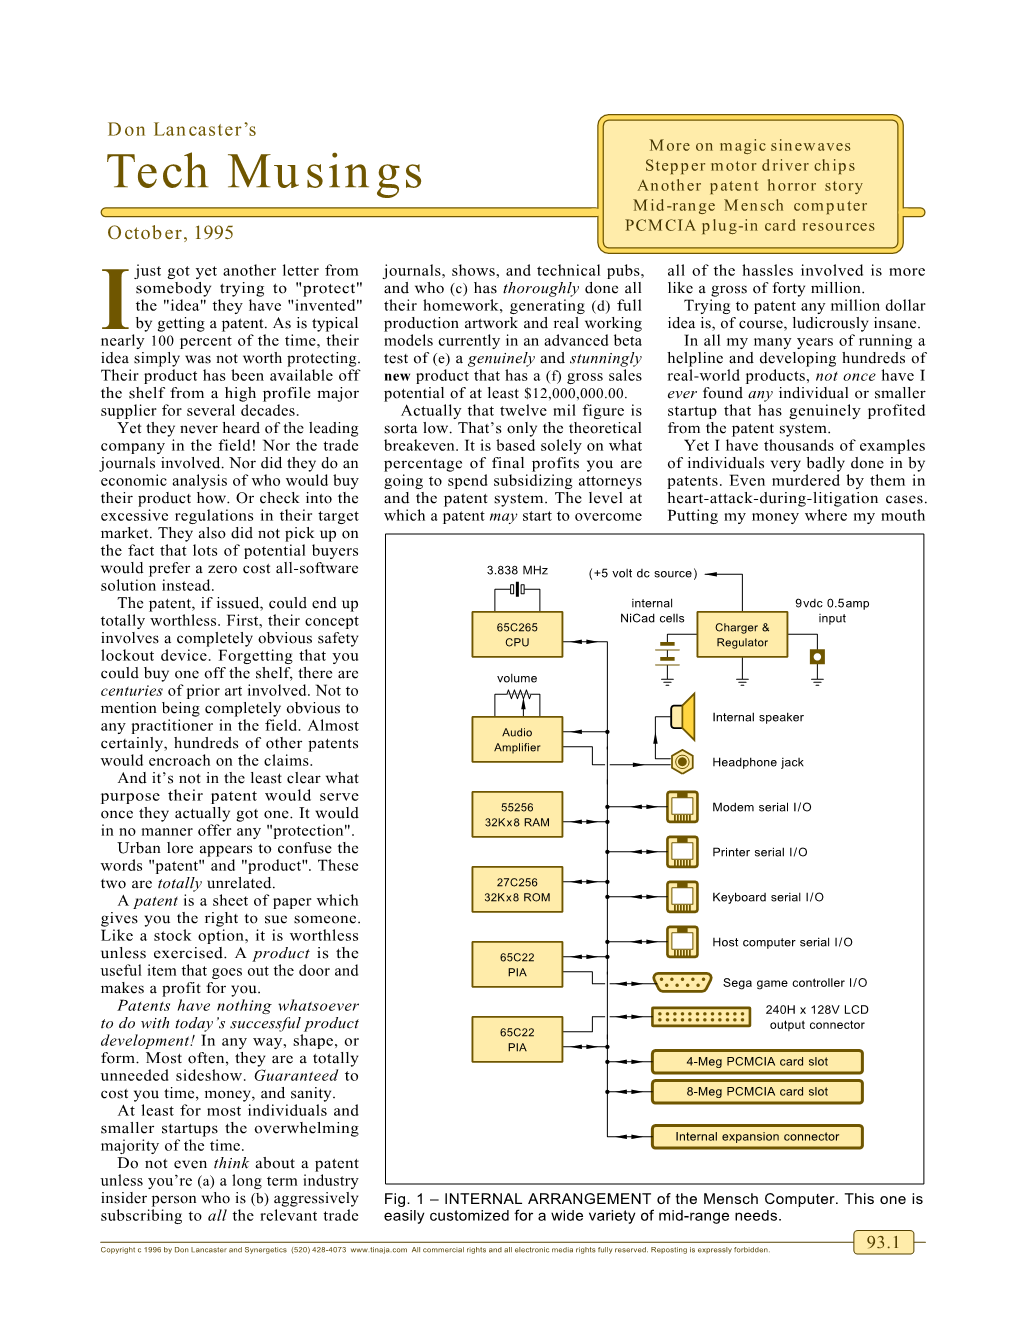 Tech Musings Another Patent Horror Story Mid-Range Mensch Computer October, 1995 PCMCIA Plug-In Card Resources